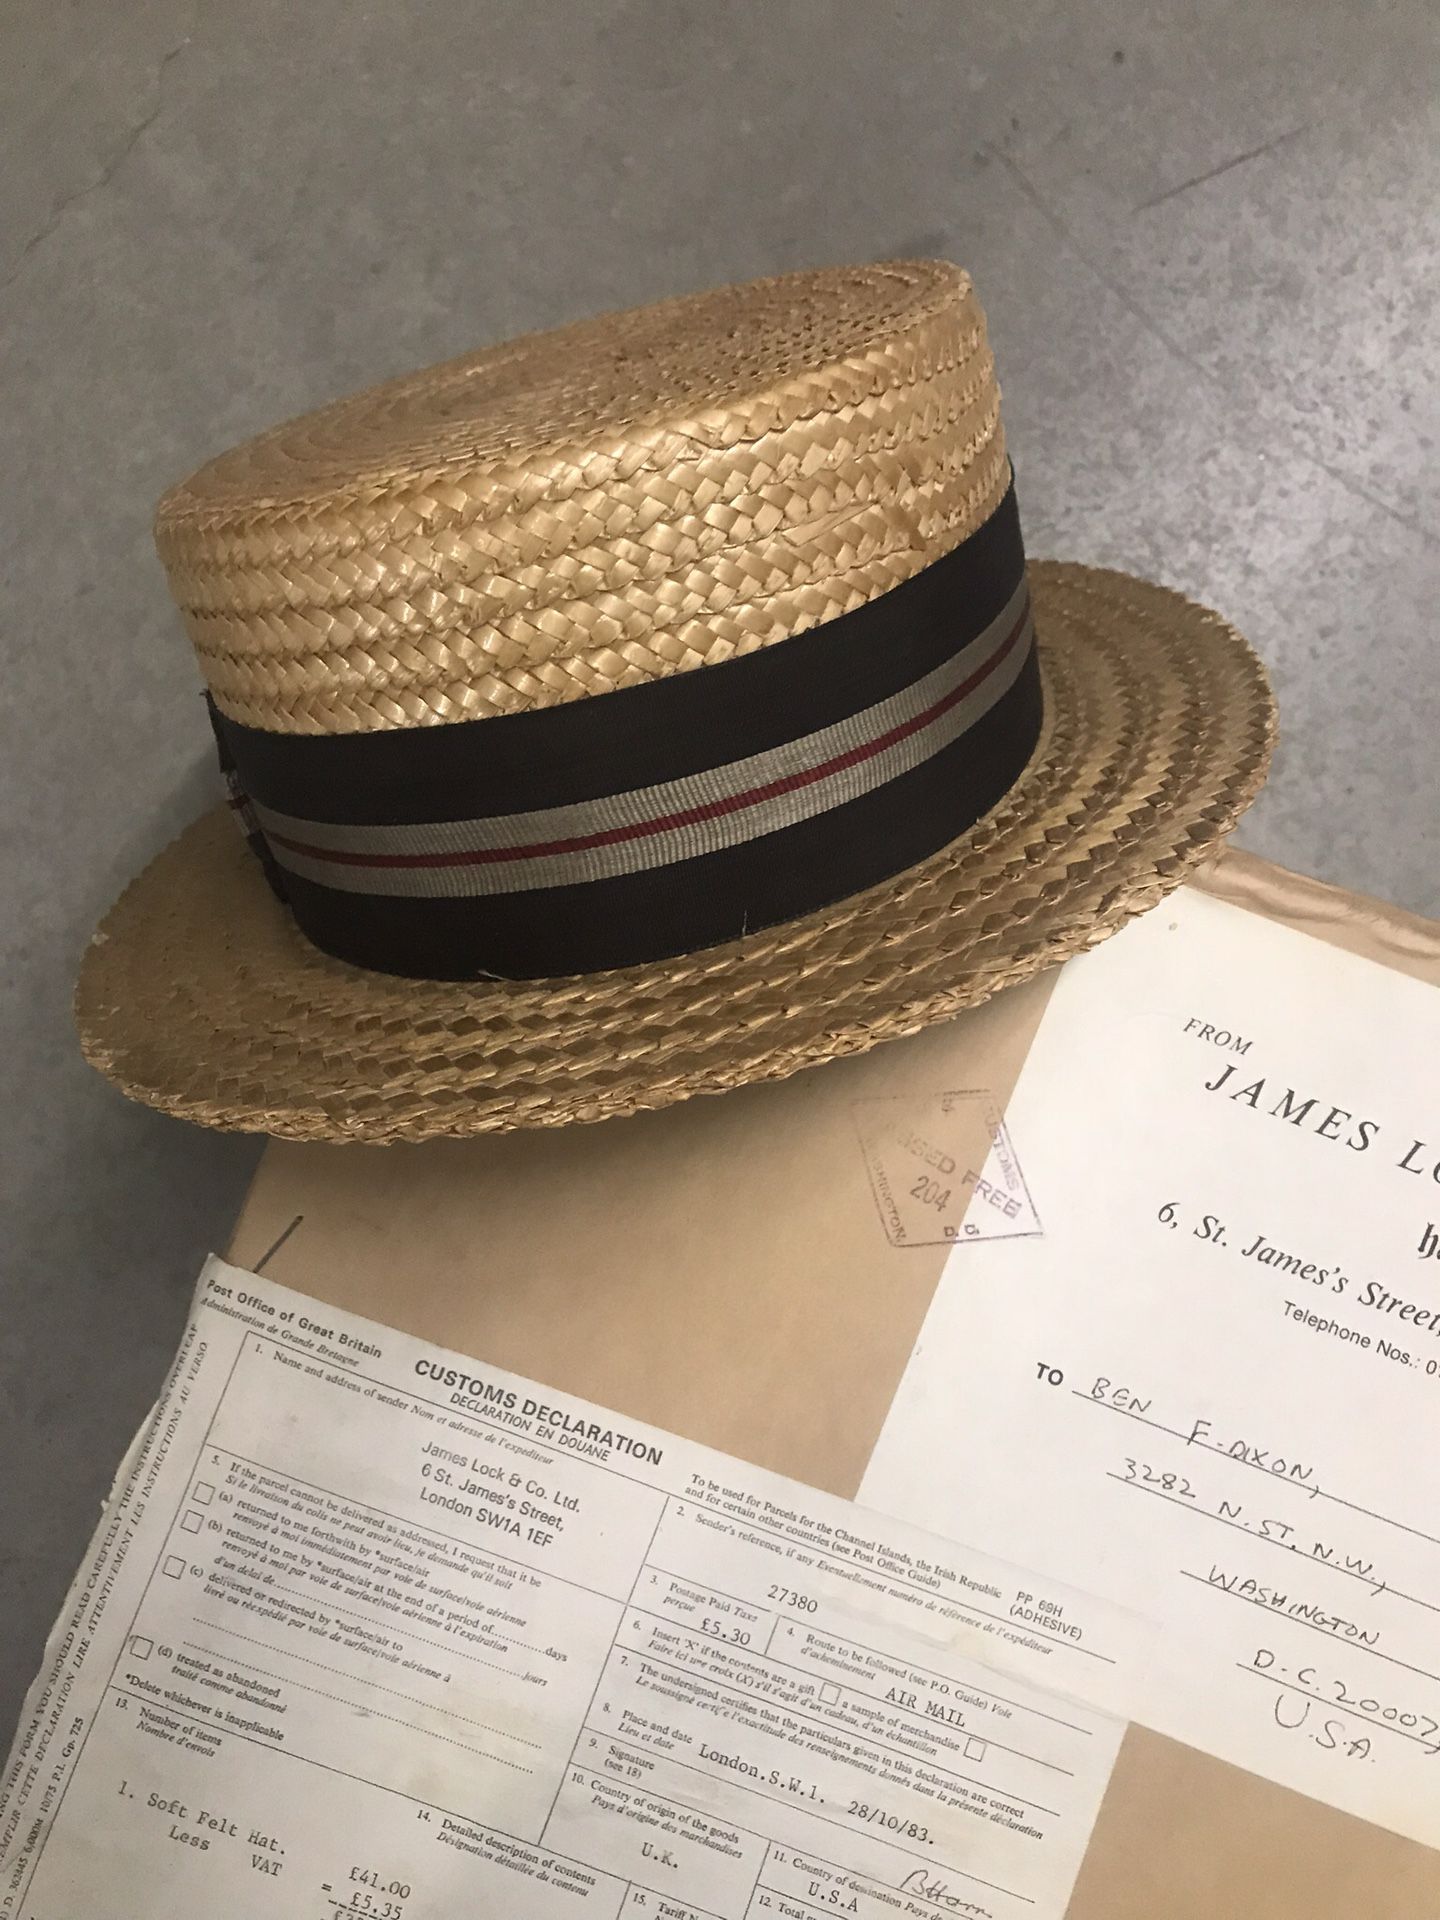 Straw boater hat 1940s in original box from London